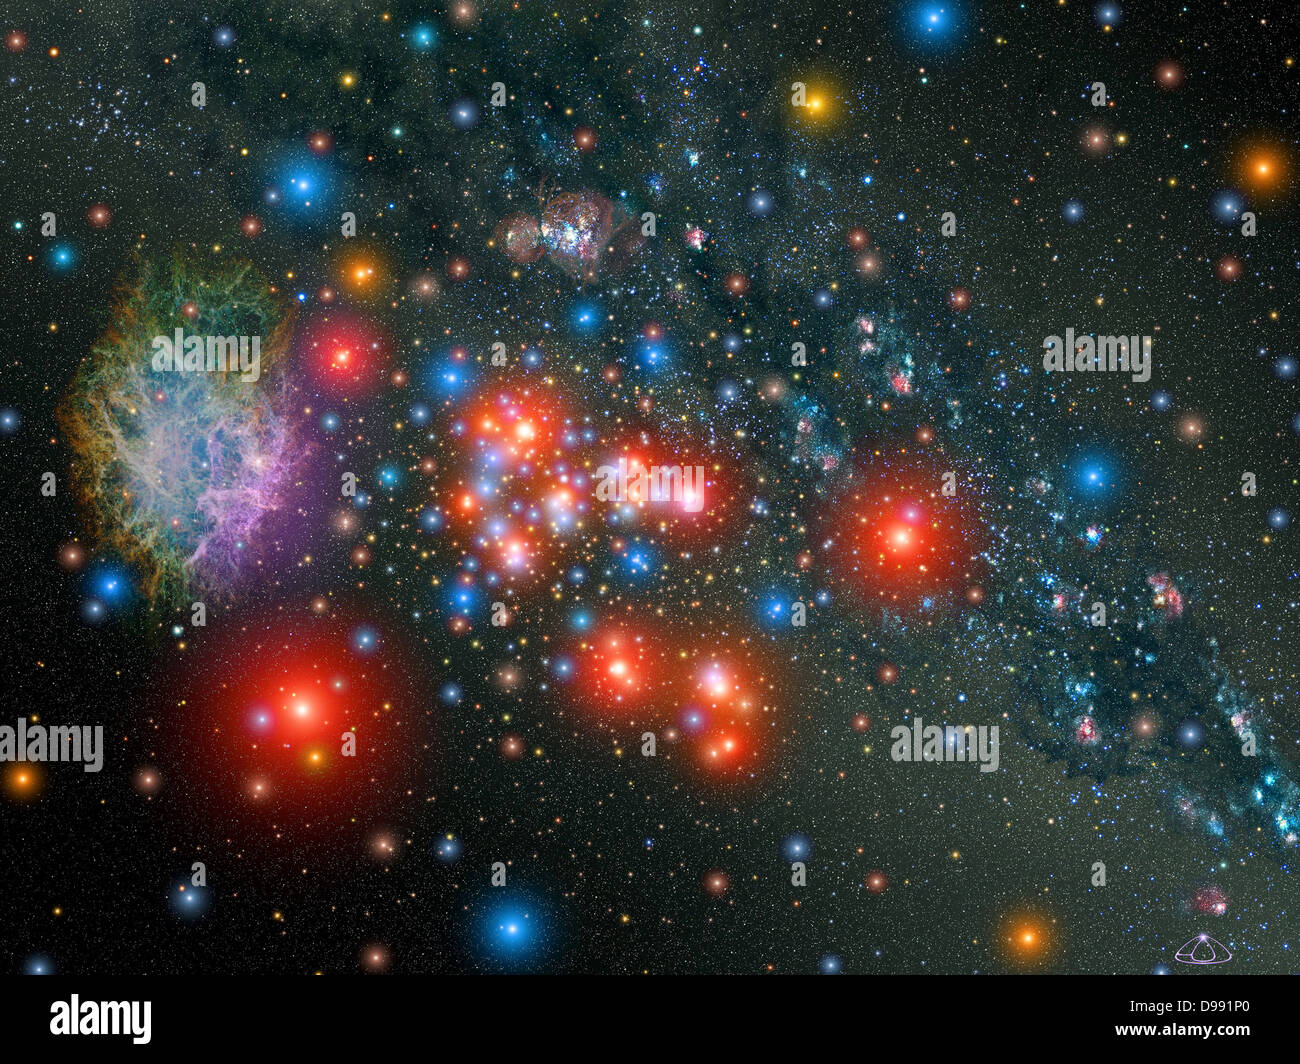 Artist's impression of massive star cluster within our Milky Way Galaxy ablaze with glow of 14 rare red supergiant stars interspersed with young blue stars. The cluster contains perhaps 20,000 stars. Credit NASA. Science Astronomy Stock Photo